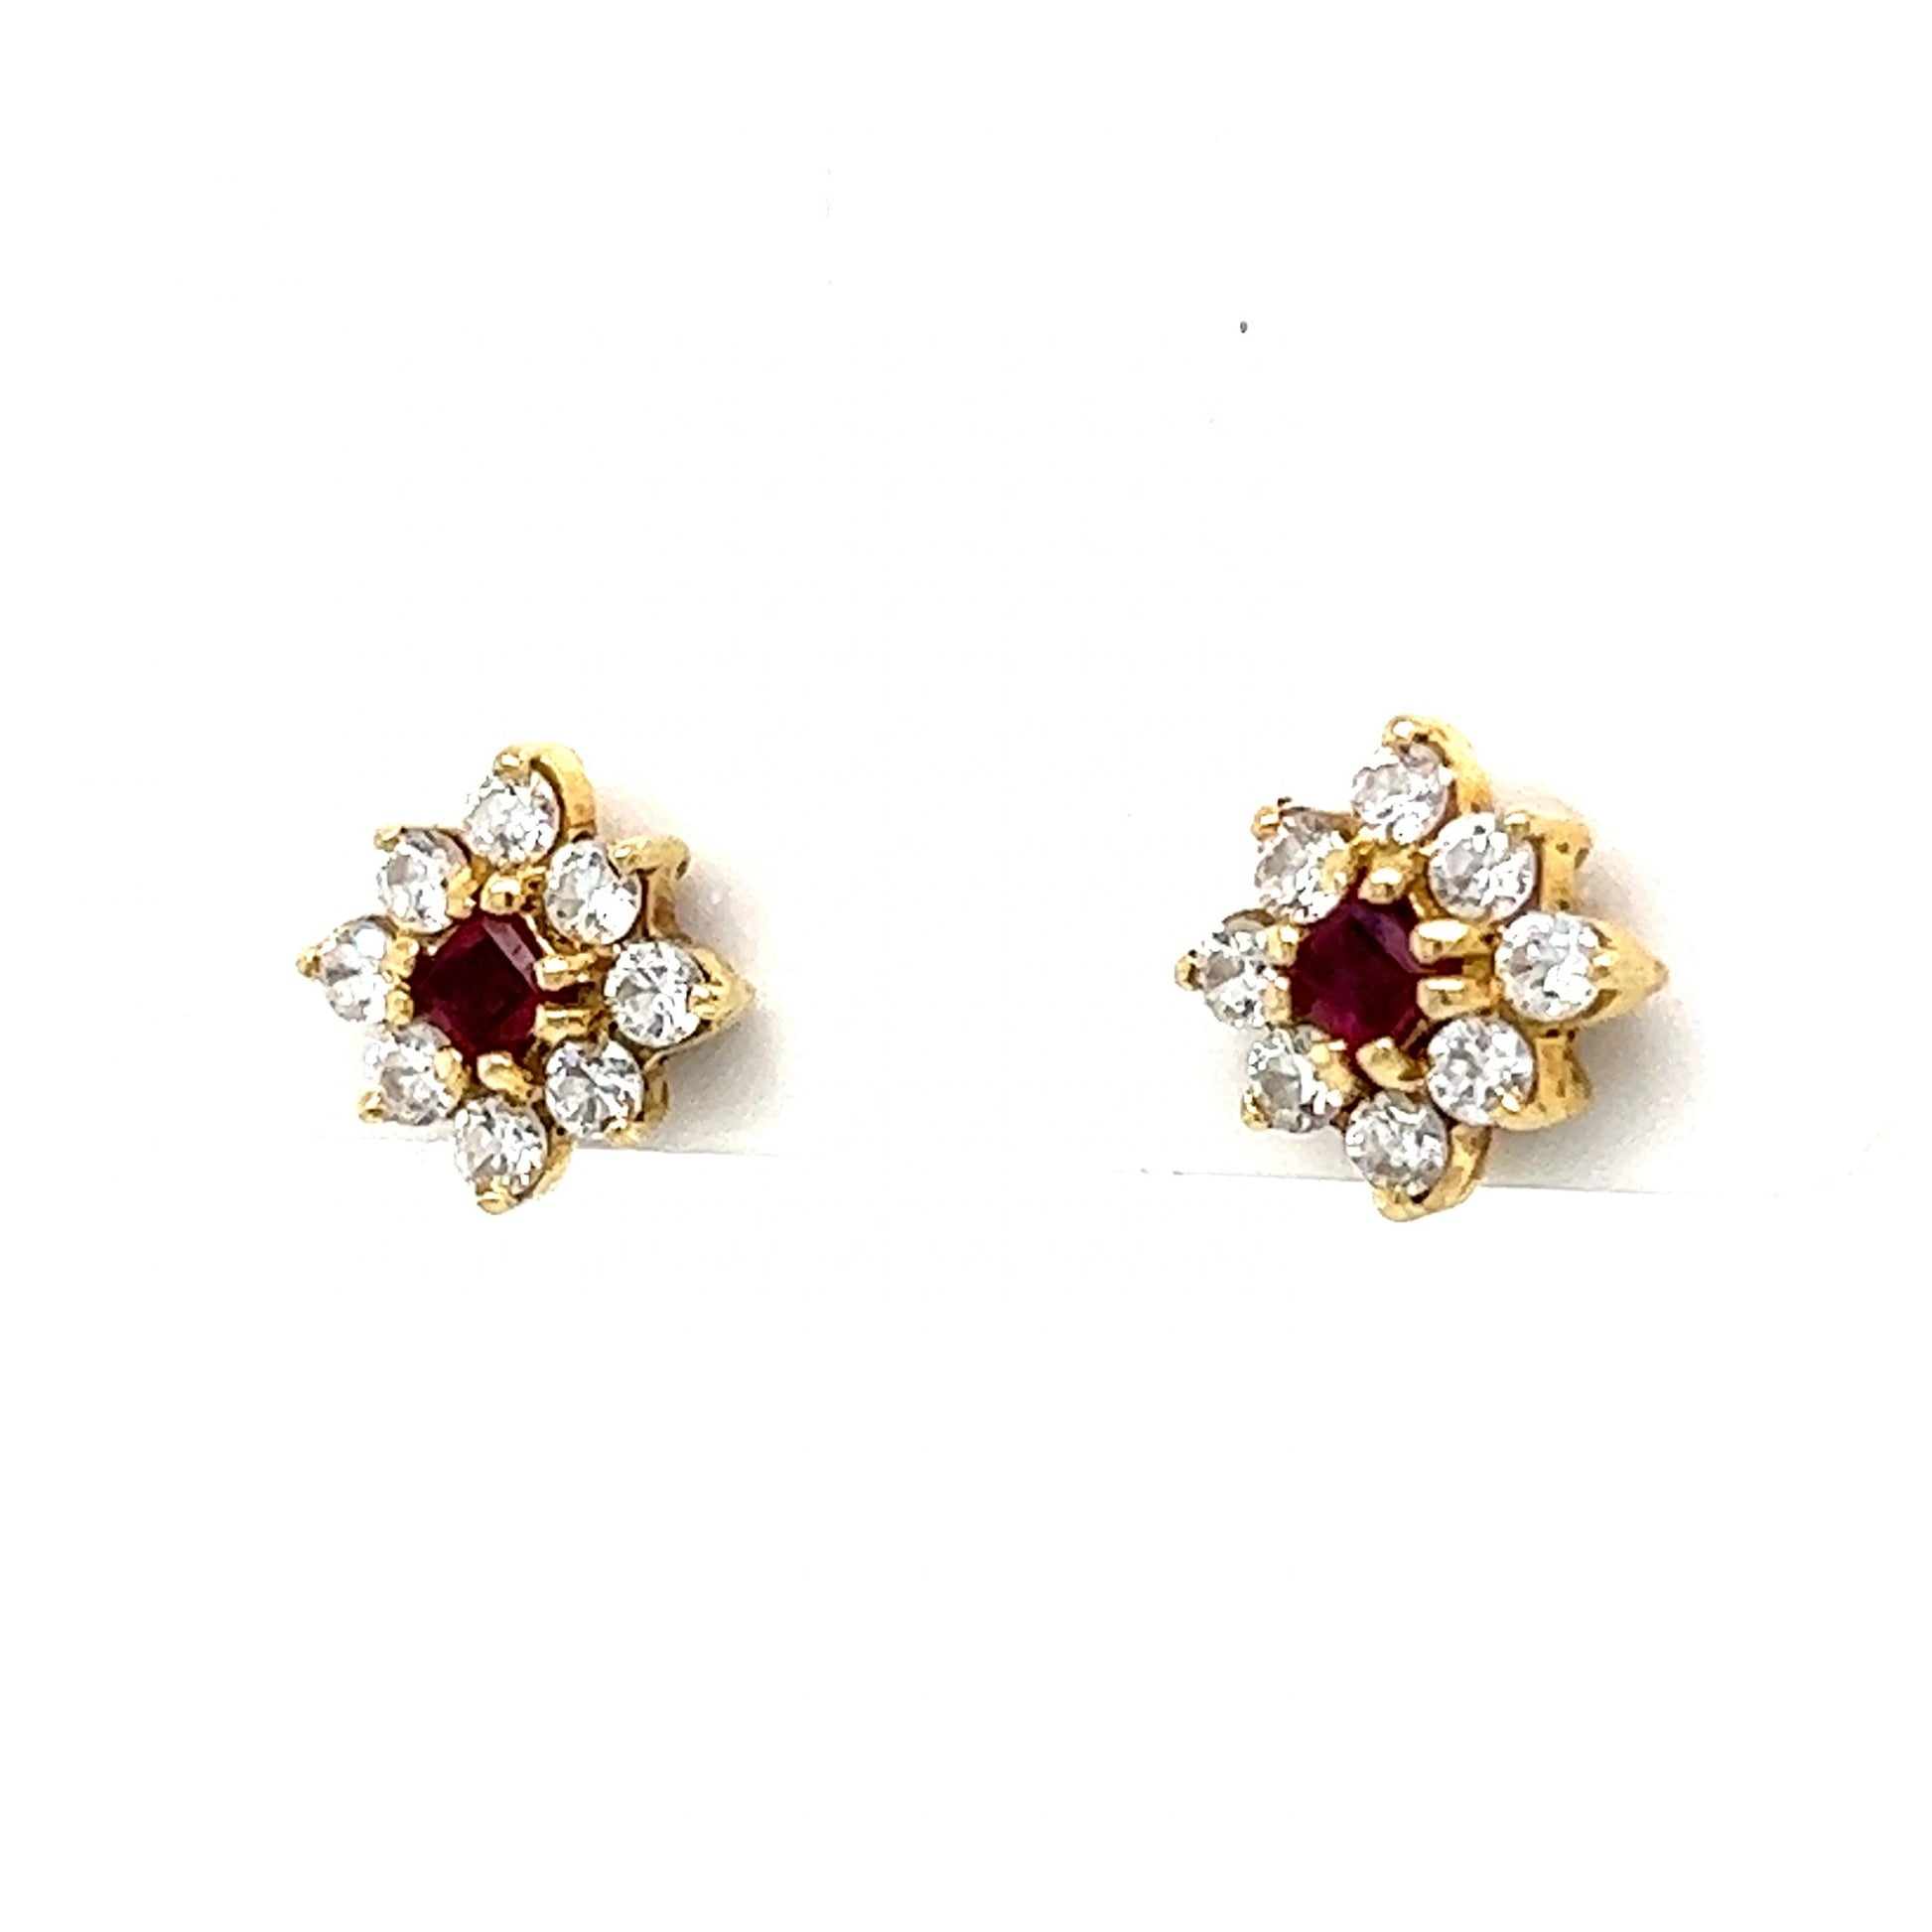 Diamond & Ruby Cluster Stud Earrings in 14k Yellow GoldComposition: 14 Karat Yellow GoldTotal Diamond Weight: .32 ctTotal Gram Weight: 1.0 gInscription: 14k